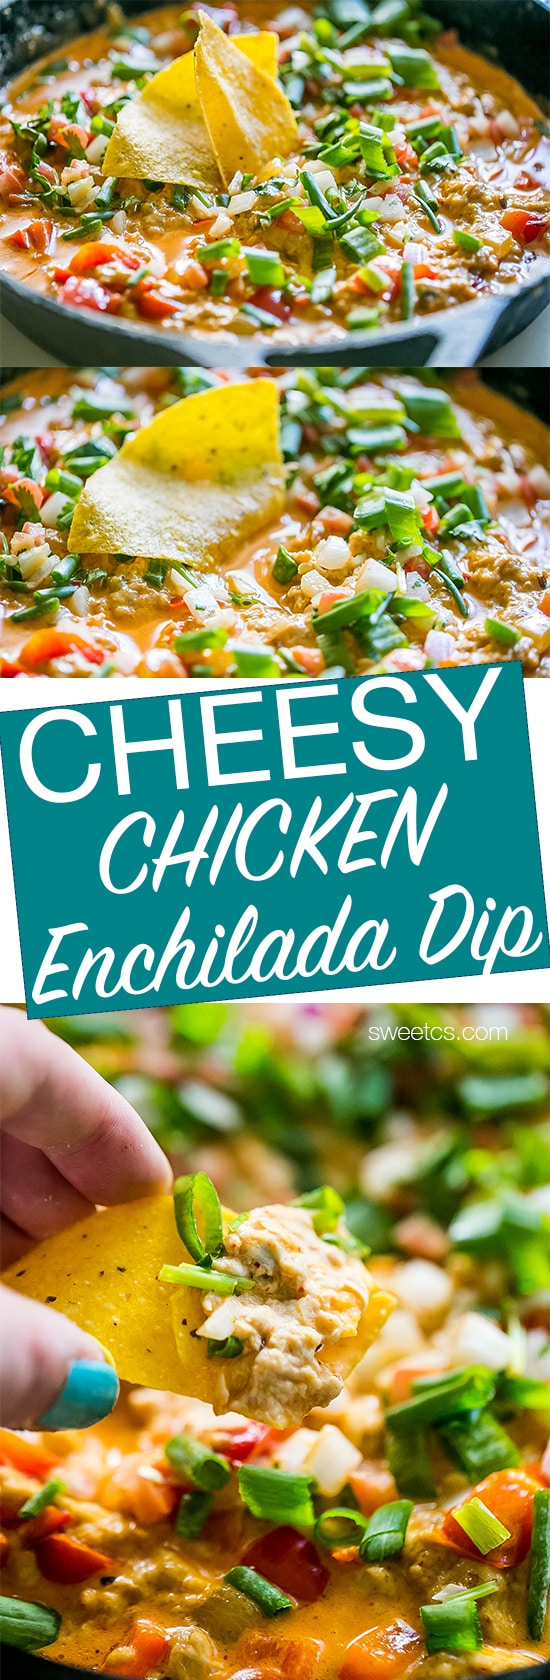 This cheesy chicken enchilada dip is SO good!